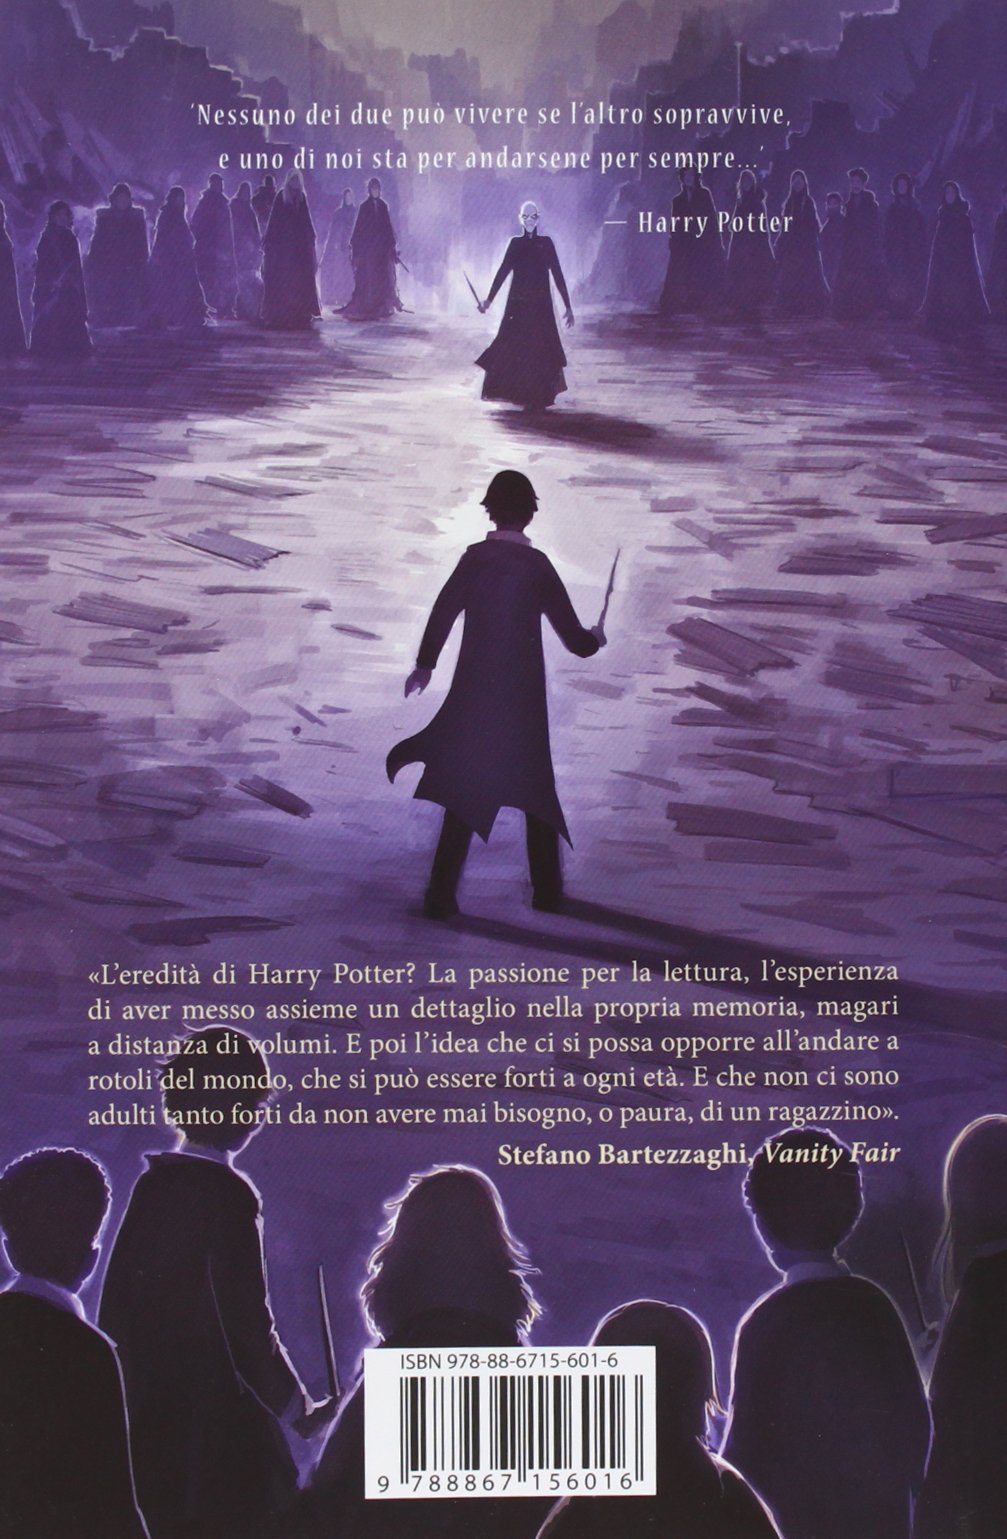 Harry Potter and the Deathly Hallows Castle Ediotion 2013 – Back Italian Cover